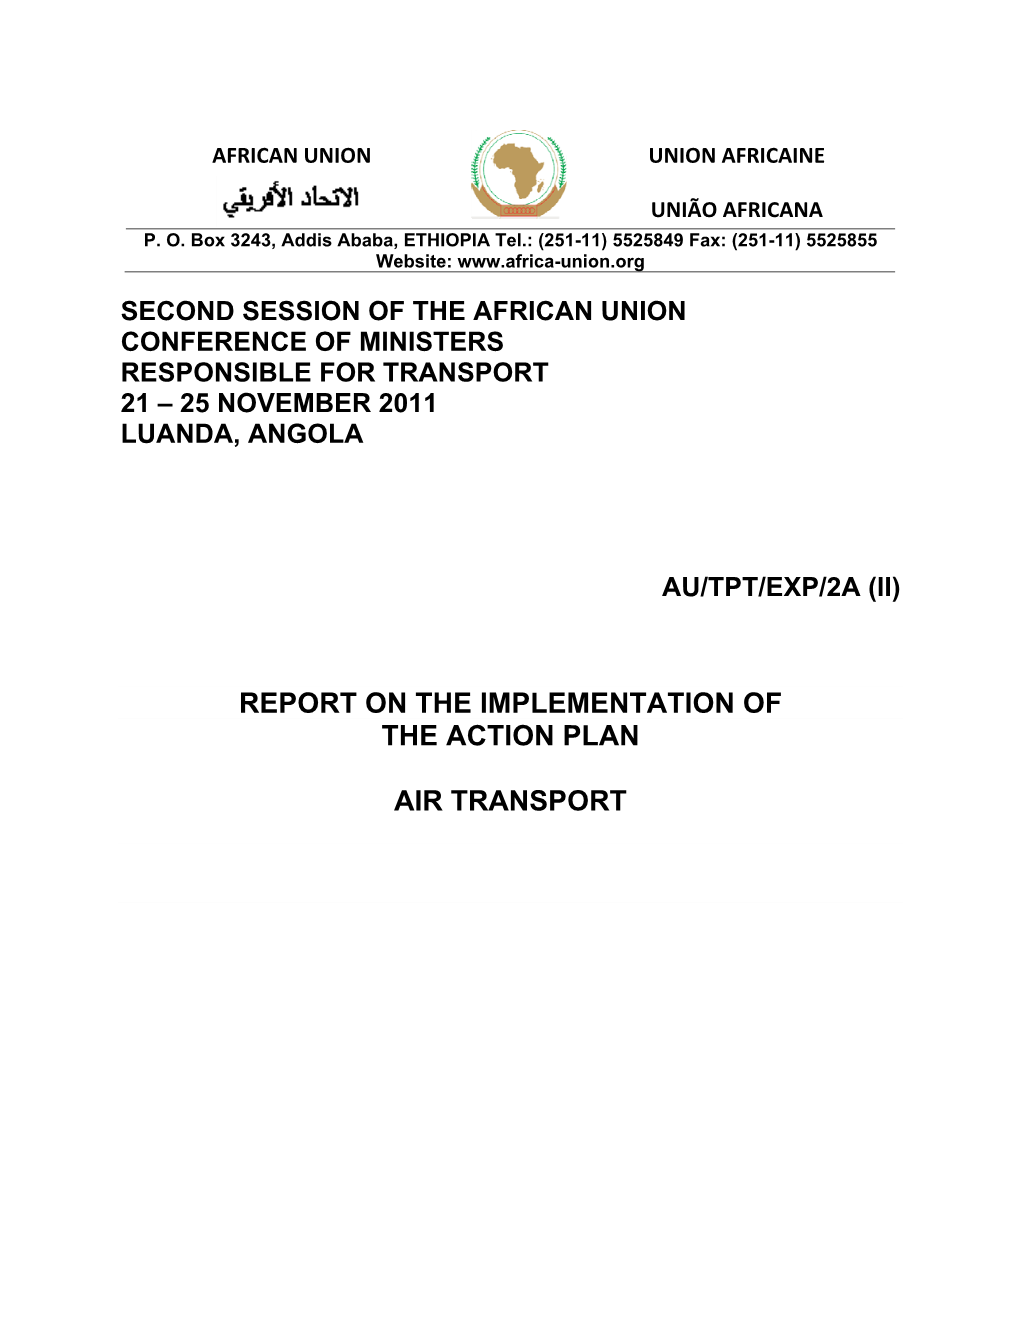 Report on the Implementation of the Action Plan Air